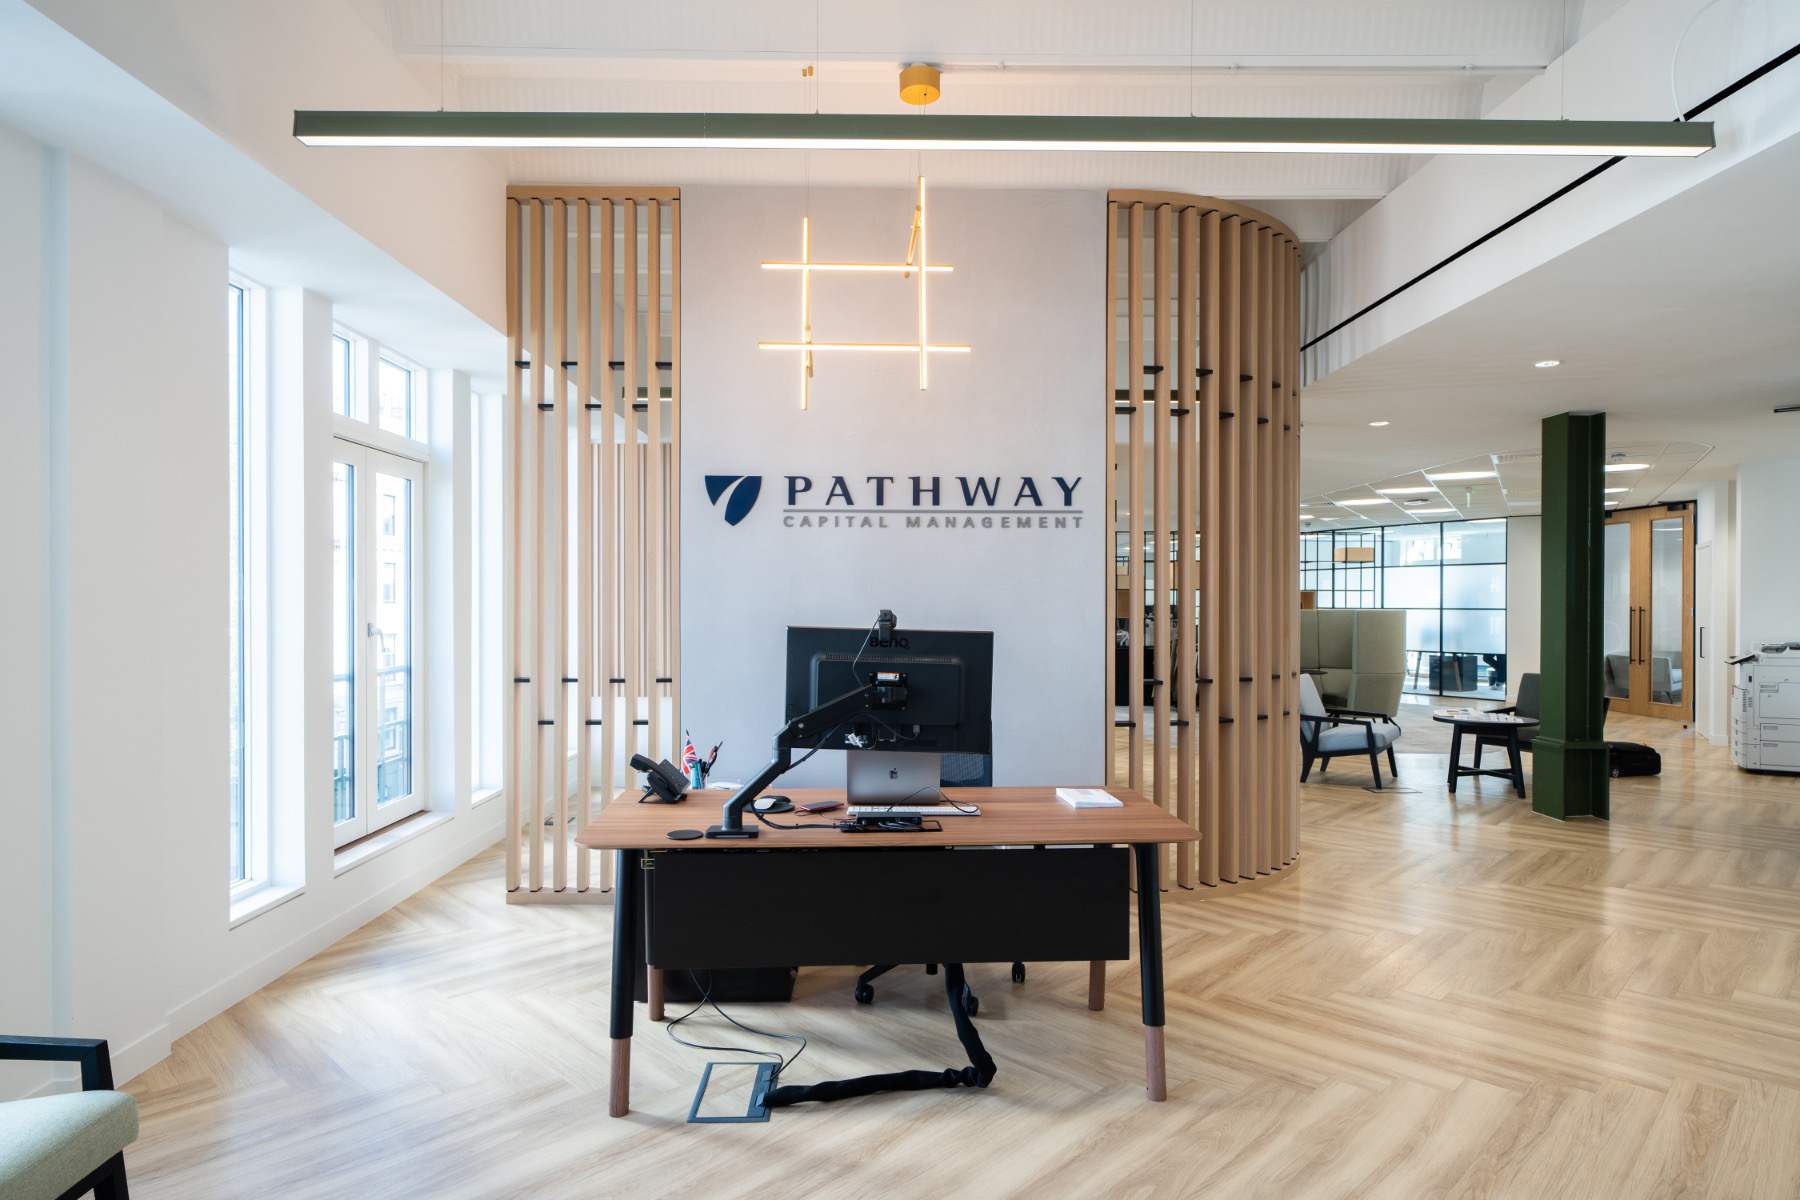 pathway-capital-management-office-6